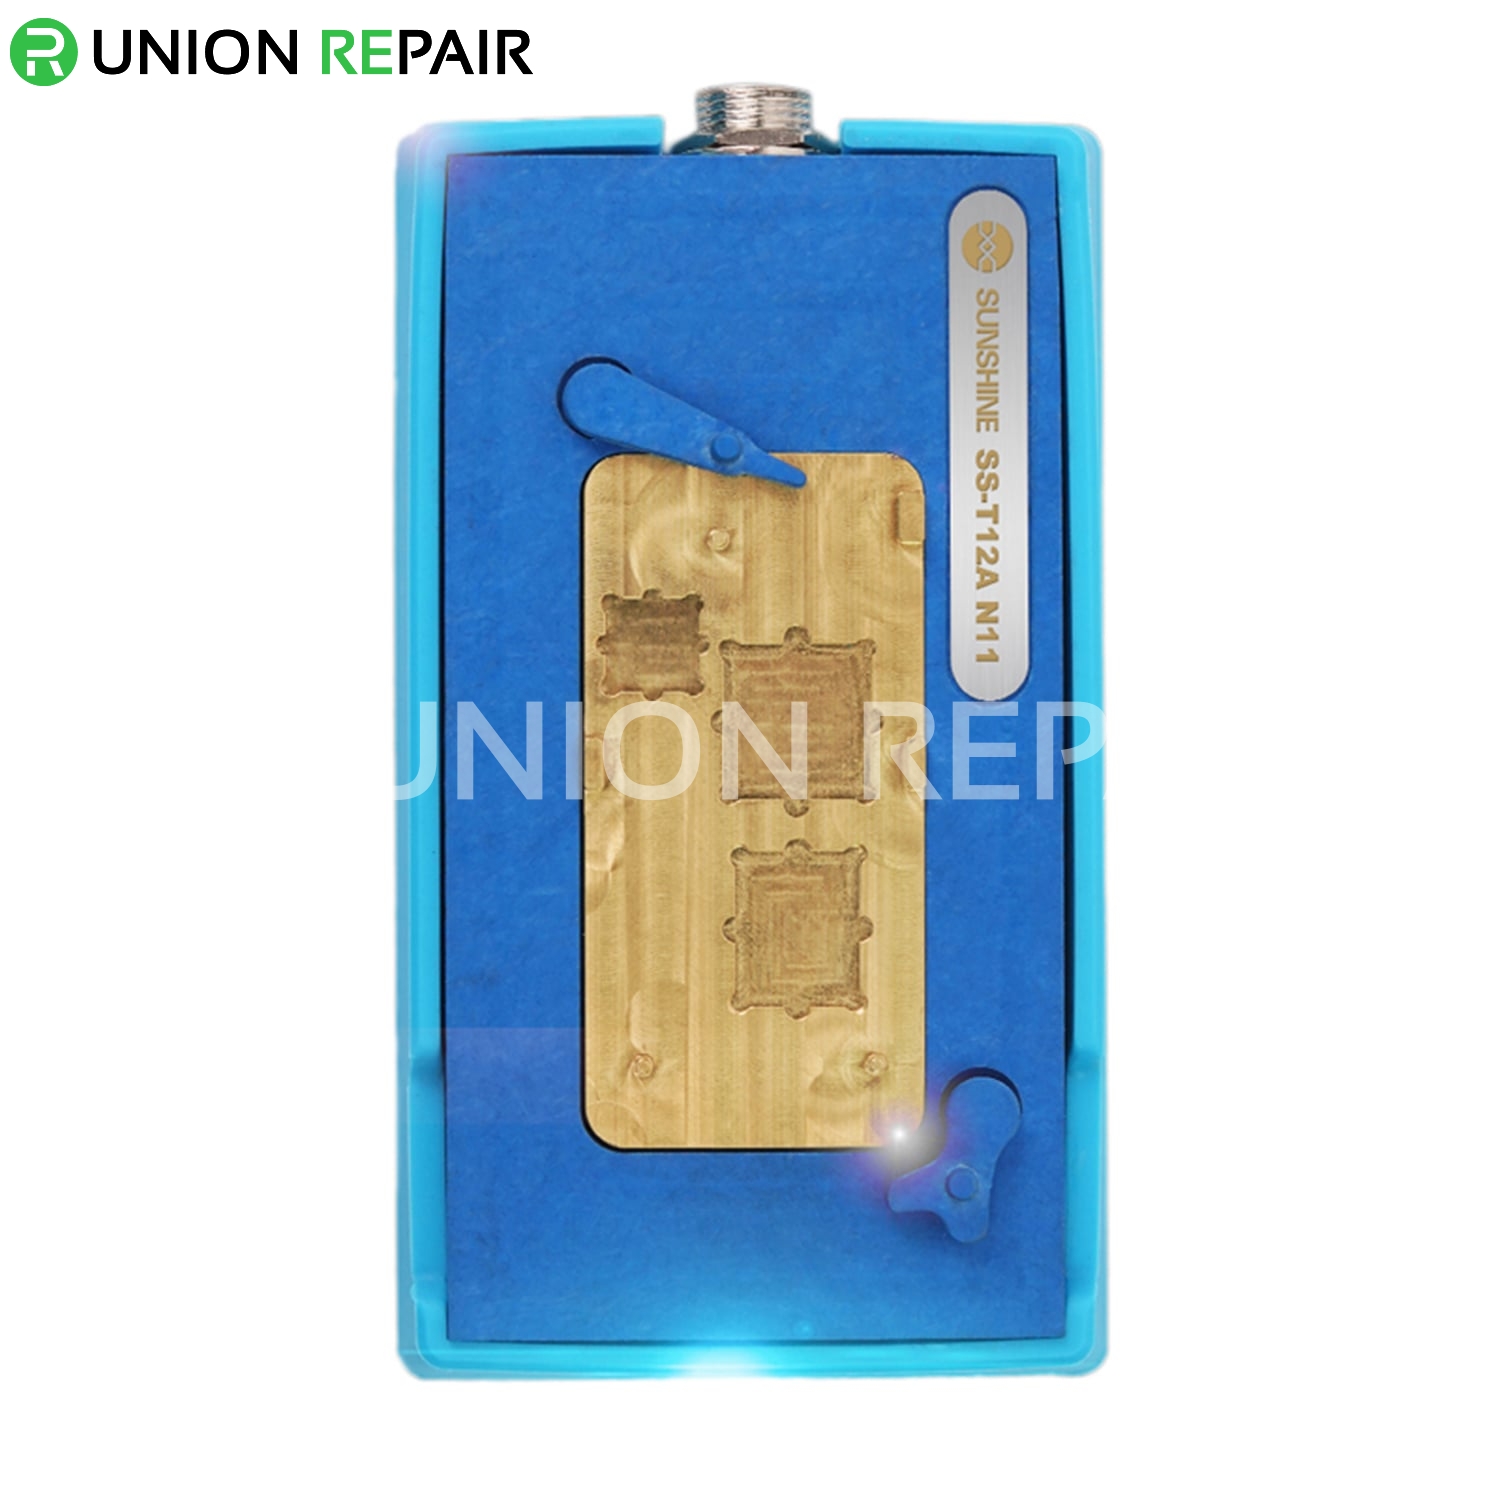 SS-T12A Mainboard Preheater for iPhone X/XS/XS Max, Condition: T12A-N11 Groove